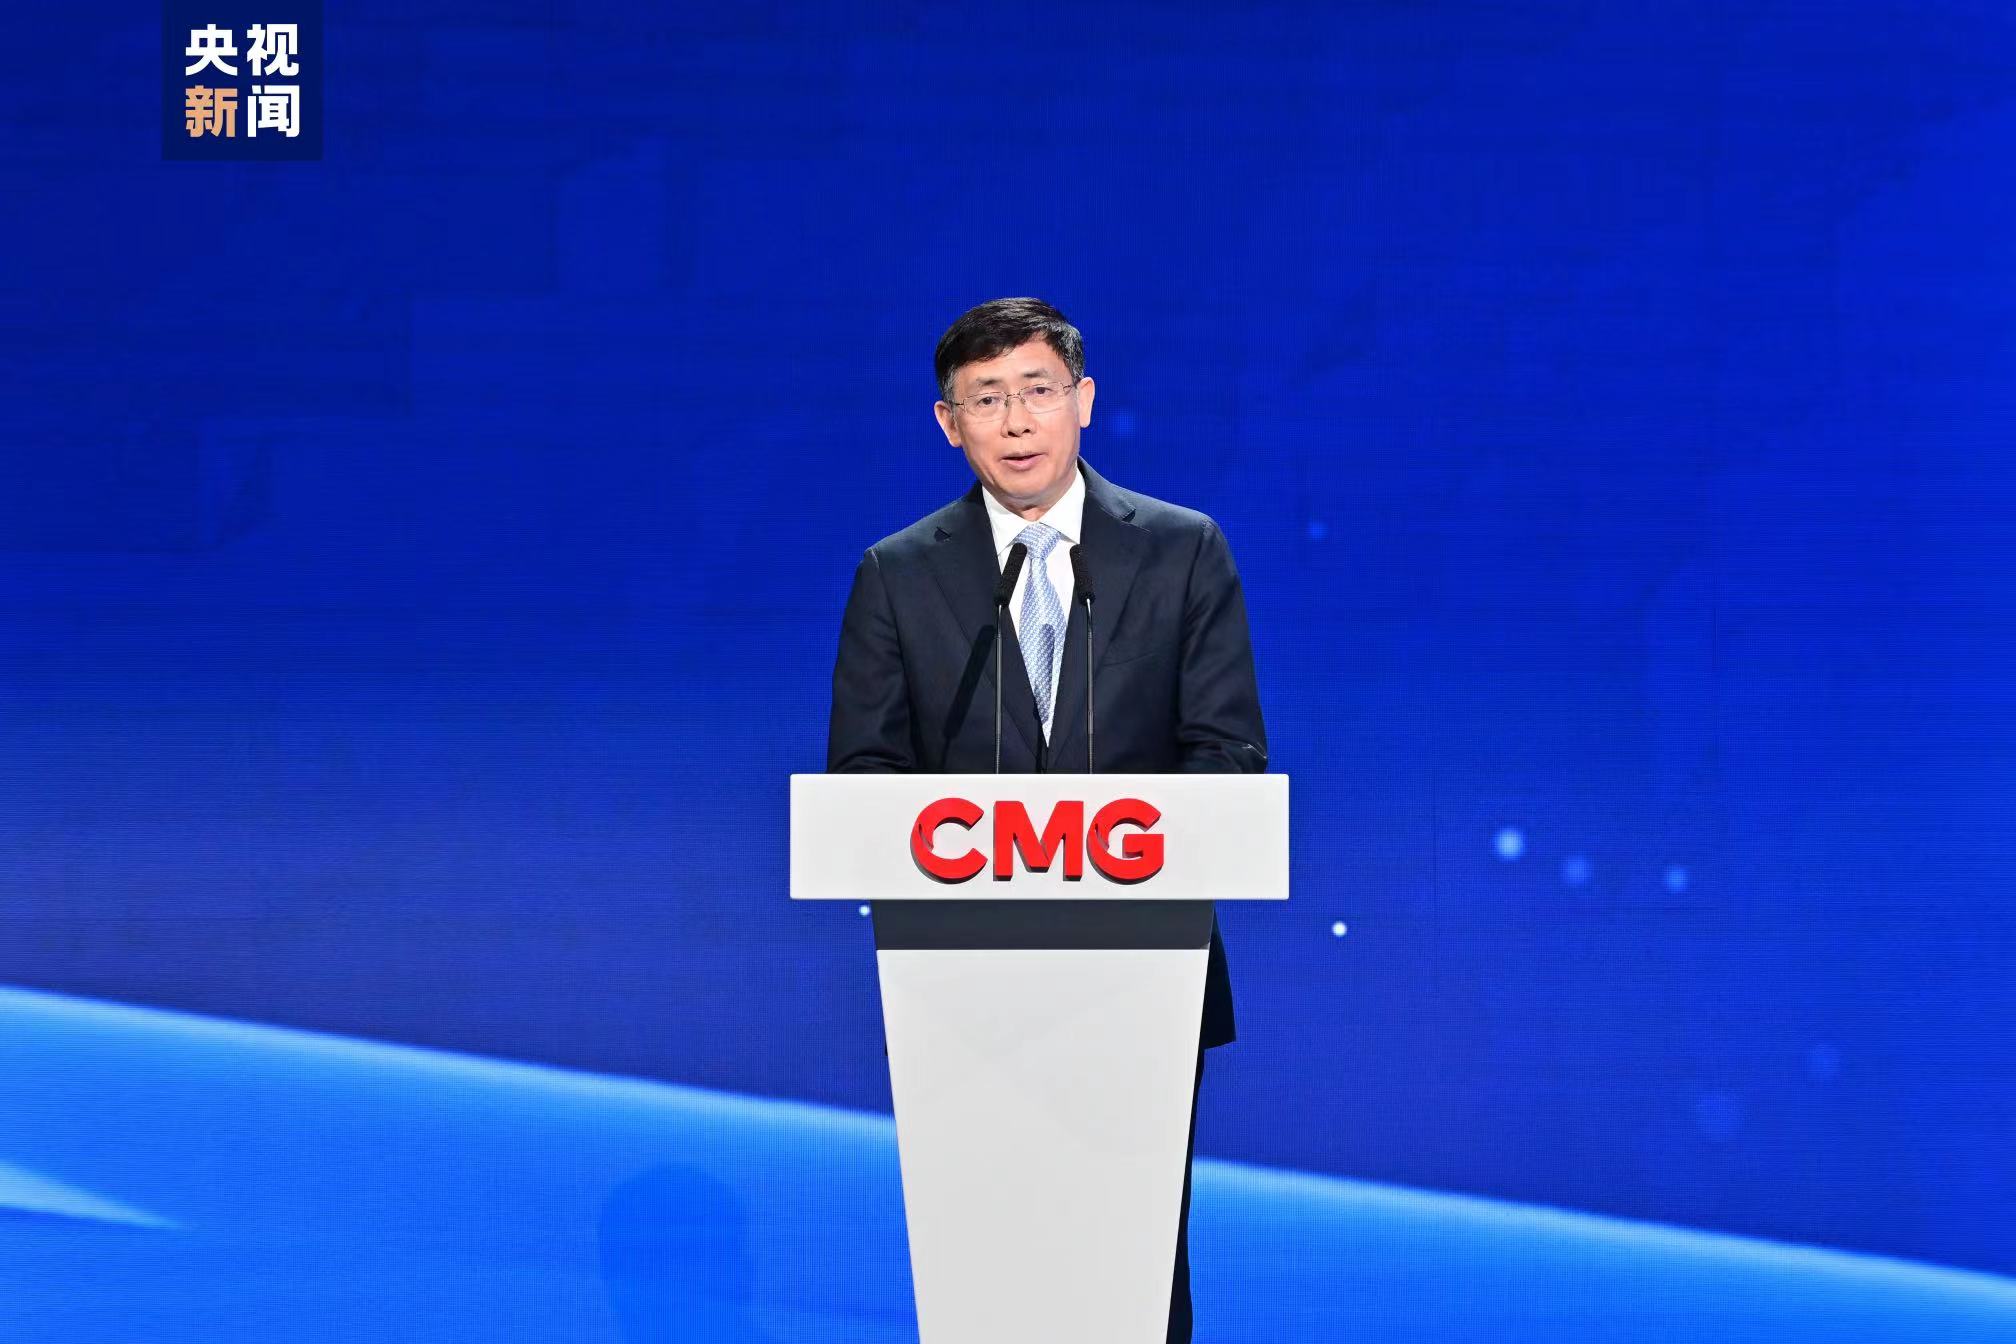 Deputy head of the General Administration of Sport (GAS) of China Zhou Jinqiang speaks at the ceremony. /CFP